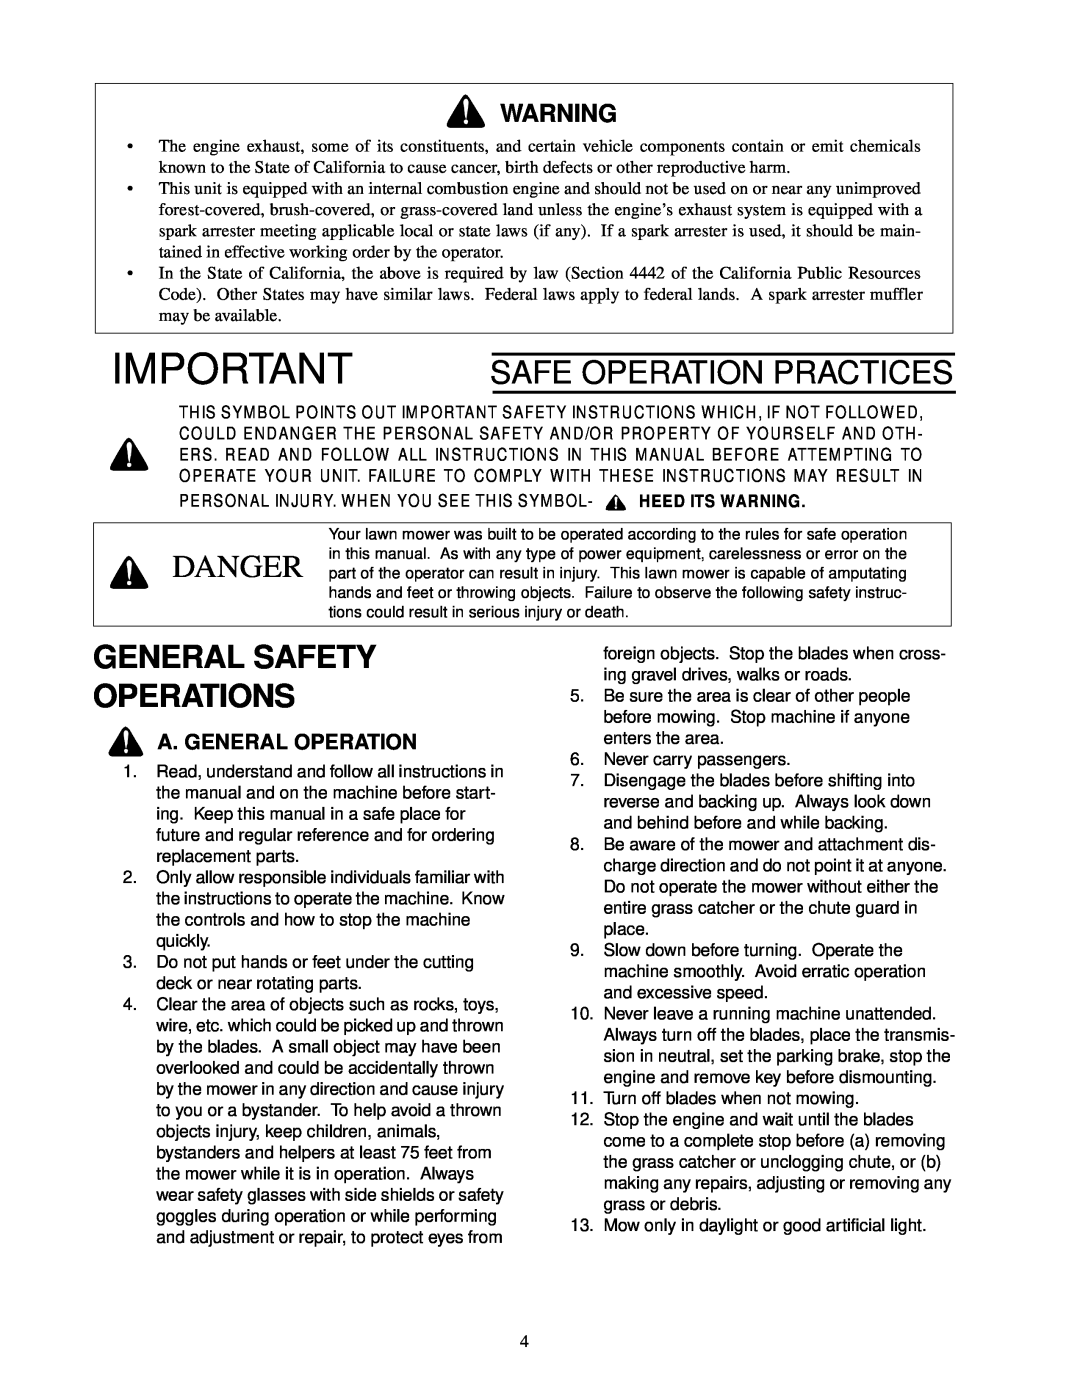 Cub Cadet 22HP Z-Force 48, 18.5HP Z-Force 42 service manual General Safety Operations, Safe Operation Practices 